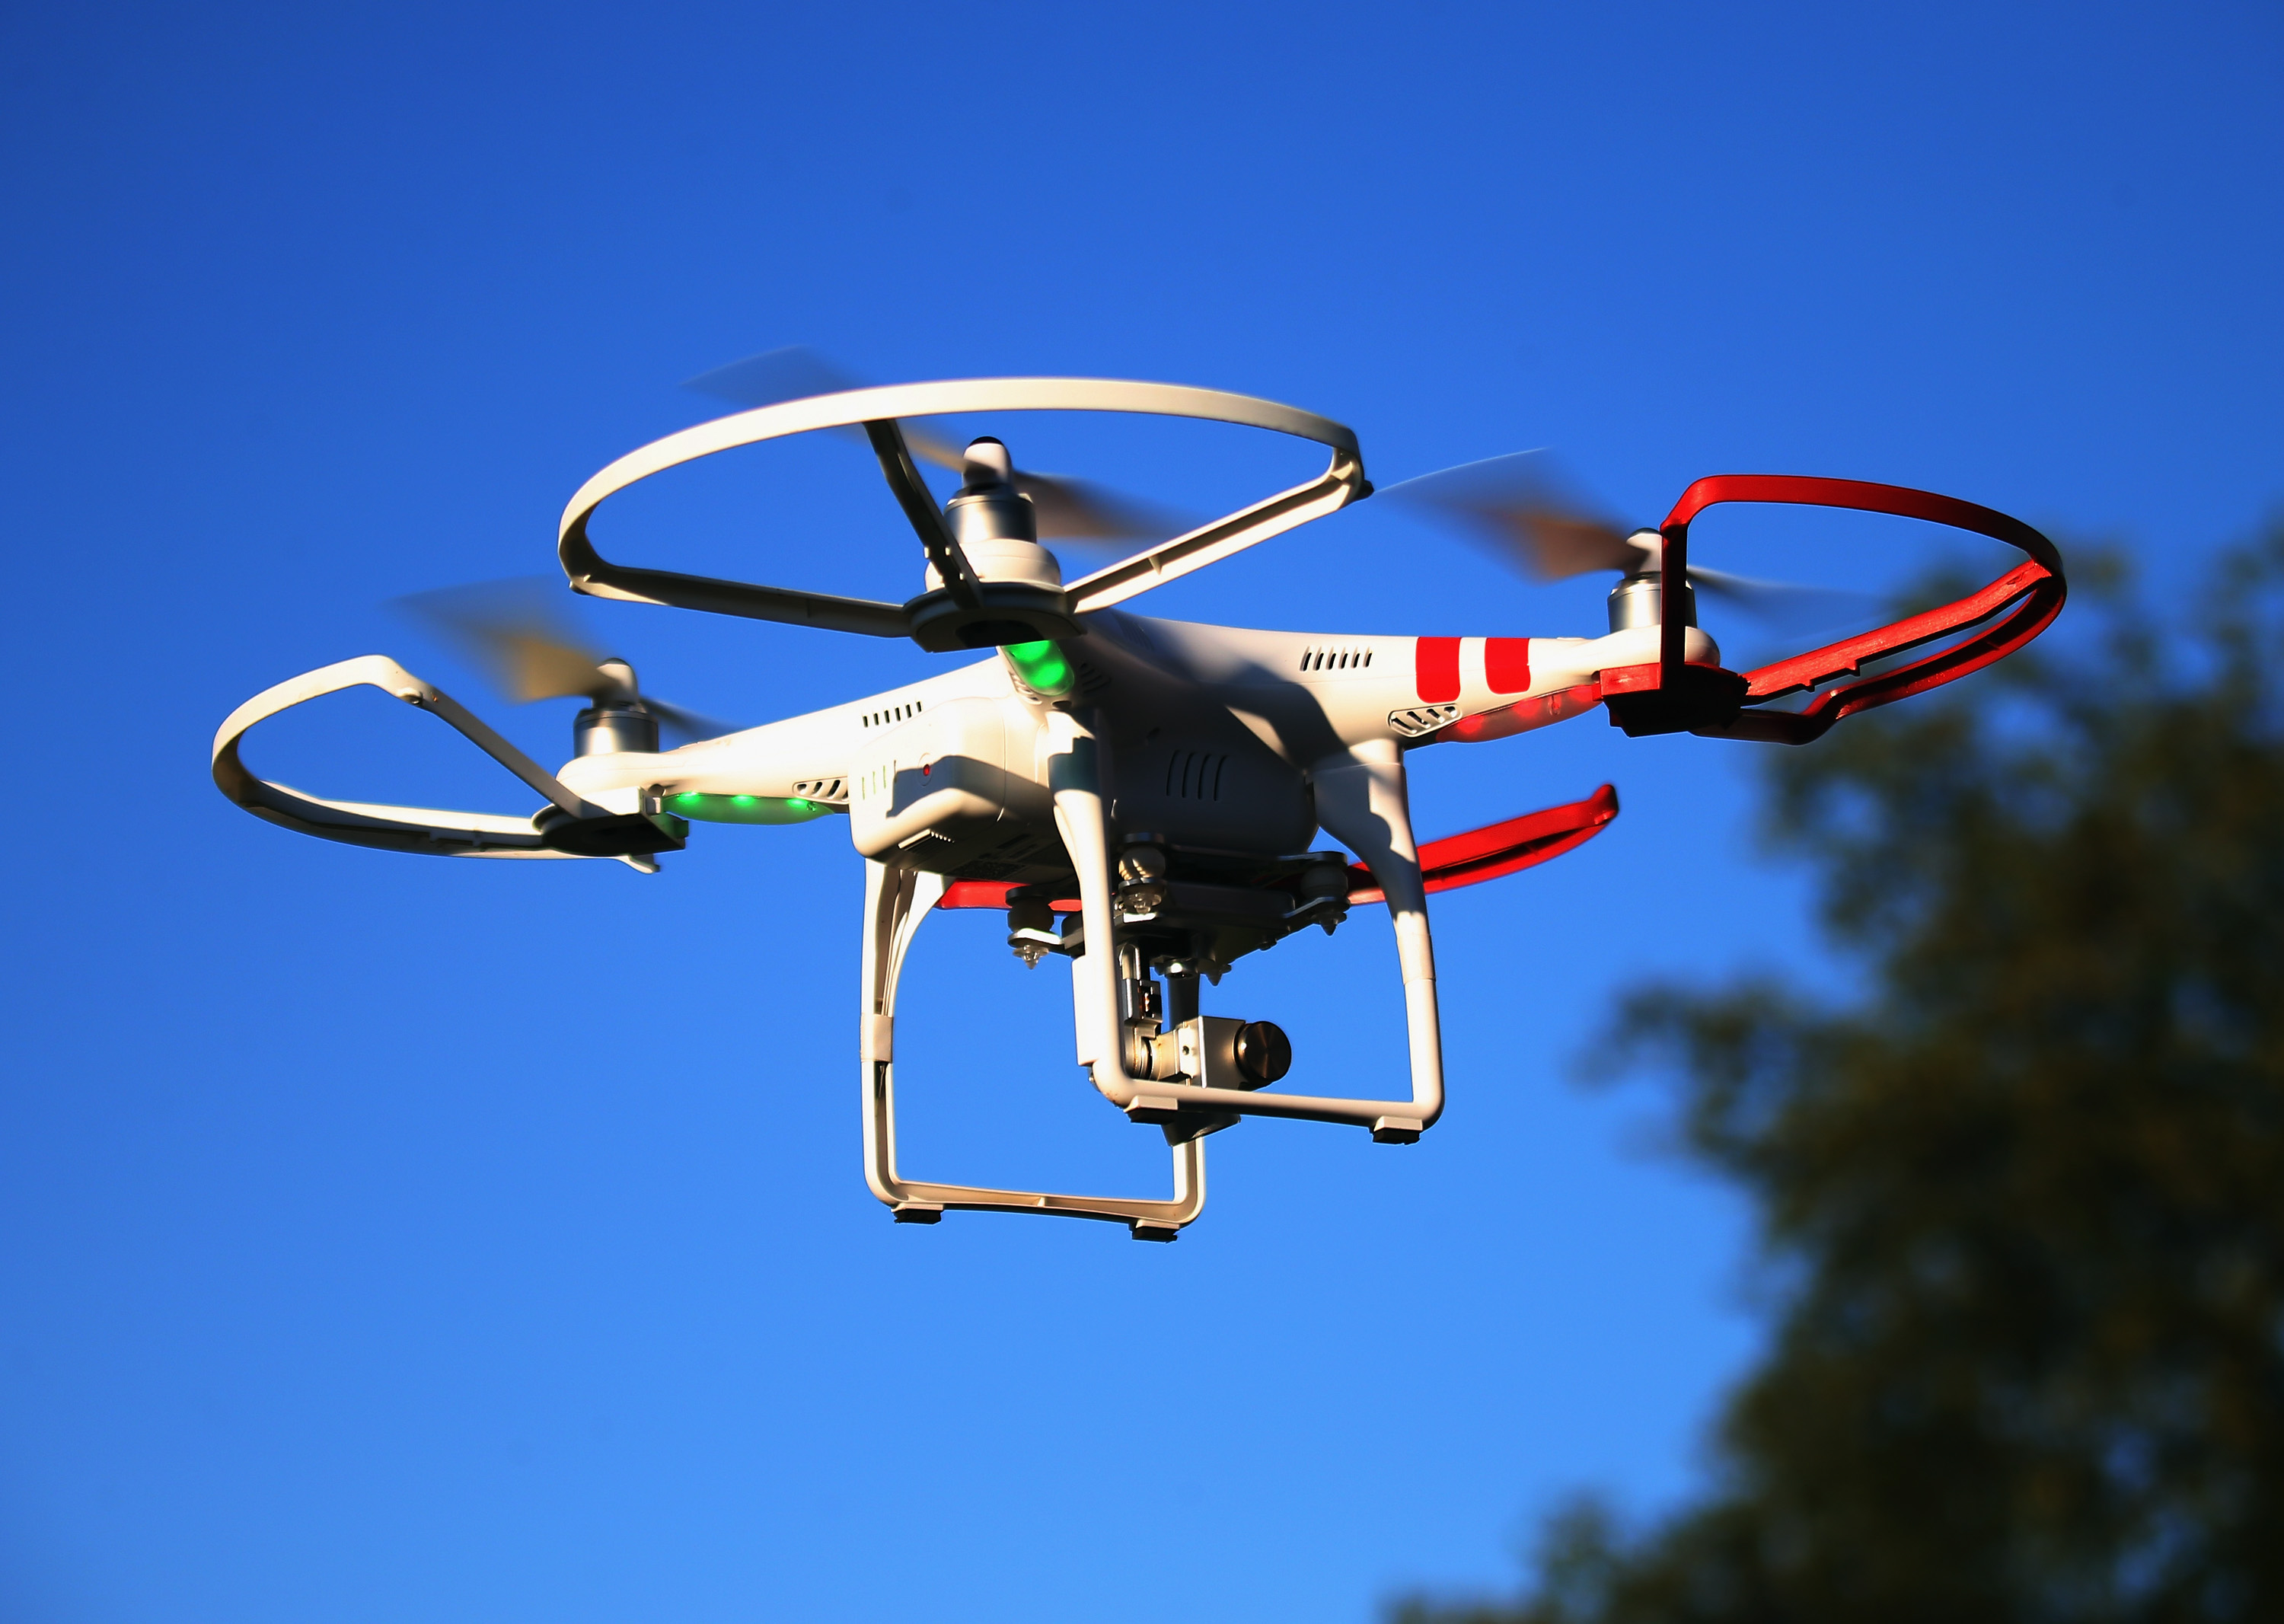 A drone is flown for recreational purposes in the sky above Old Bethpage, New York on September 5, 2015. (Bruce Bennett&mdash;Getty Images)